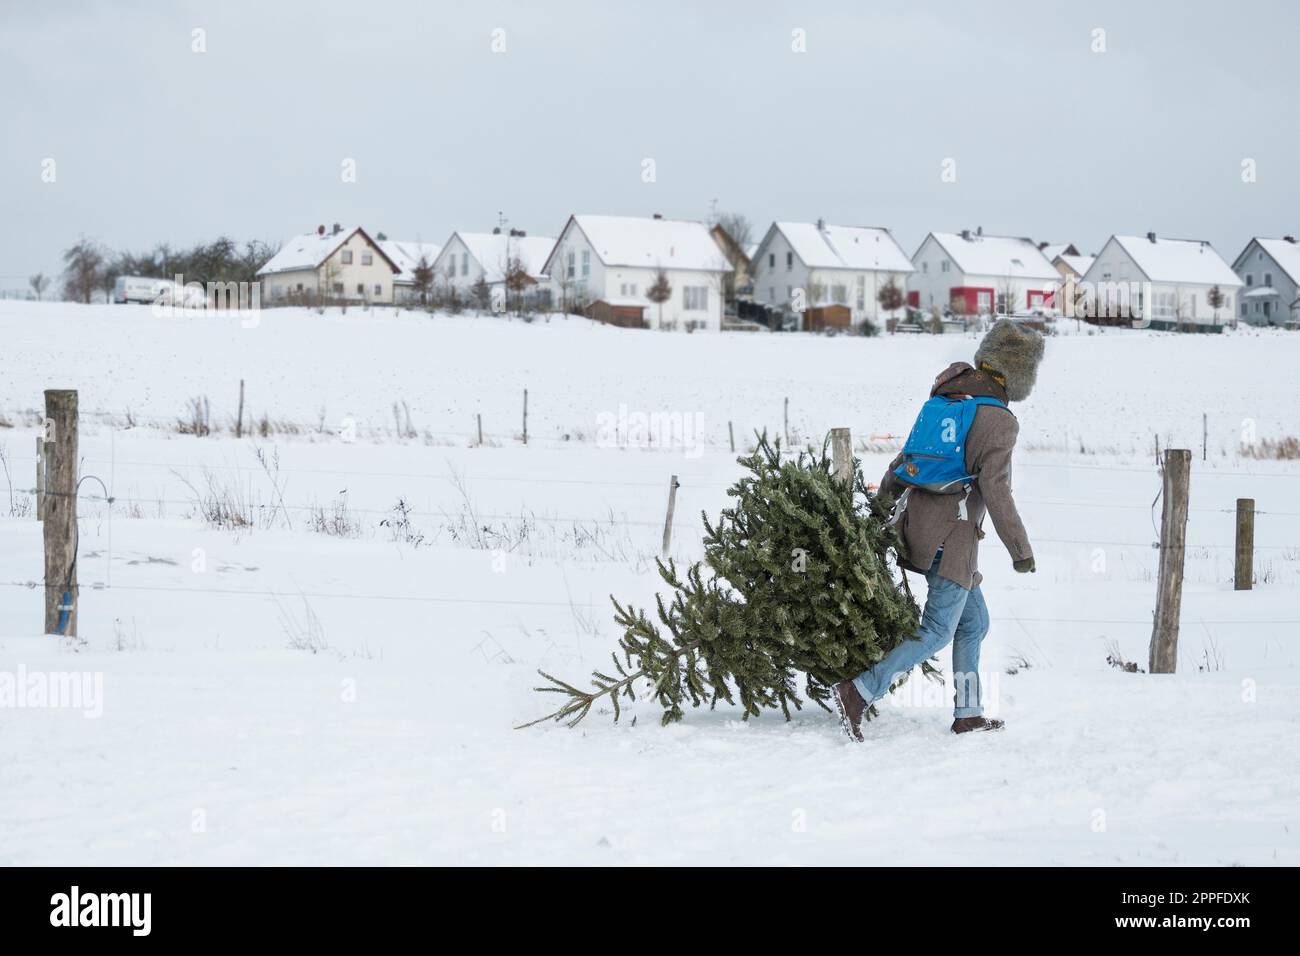 Young man carrying christmas tree in snowy landscape and village in the background, Bavaria, Germany Stock Photo